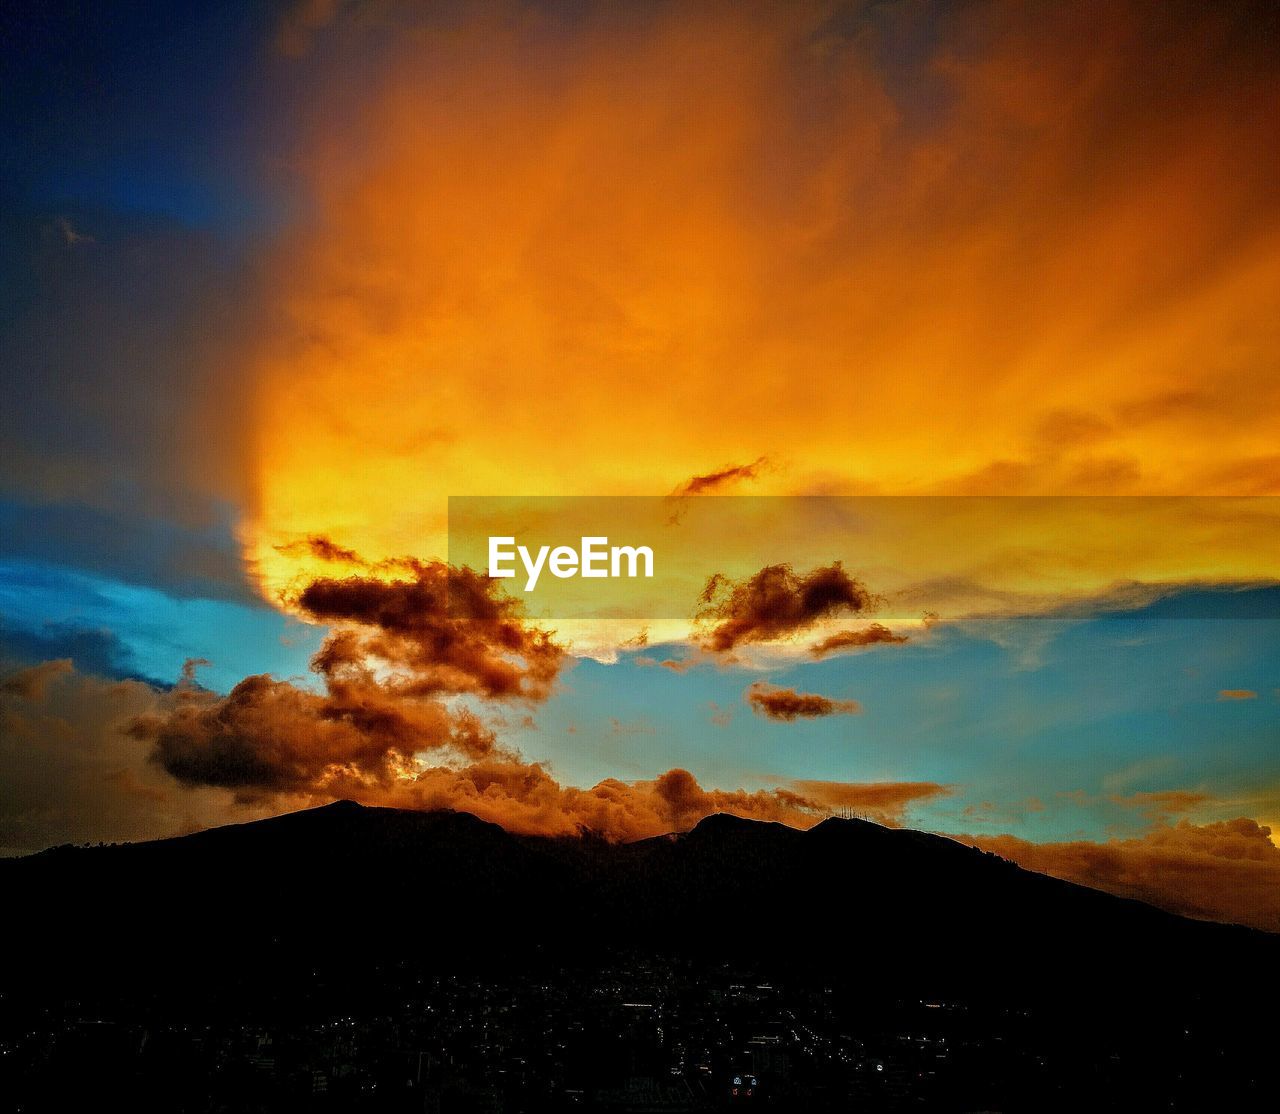 SCENIC VIEW OF SILHOUETTE MOUNTAIN AGAINST DRAMATIC SKY DURING SUNSET